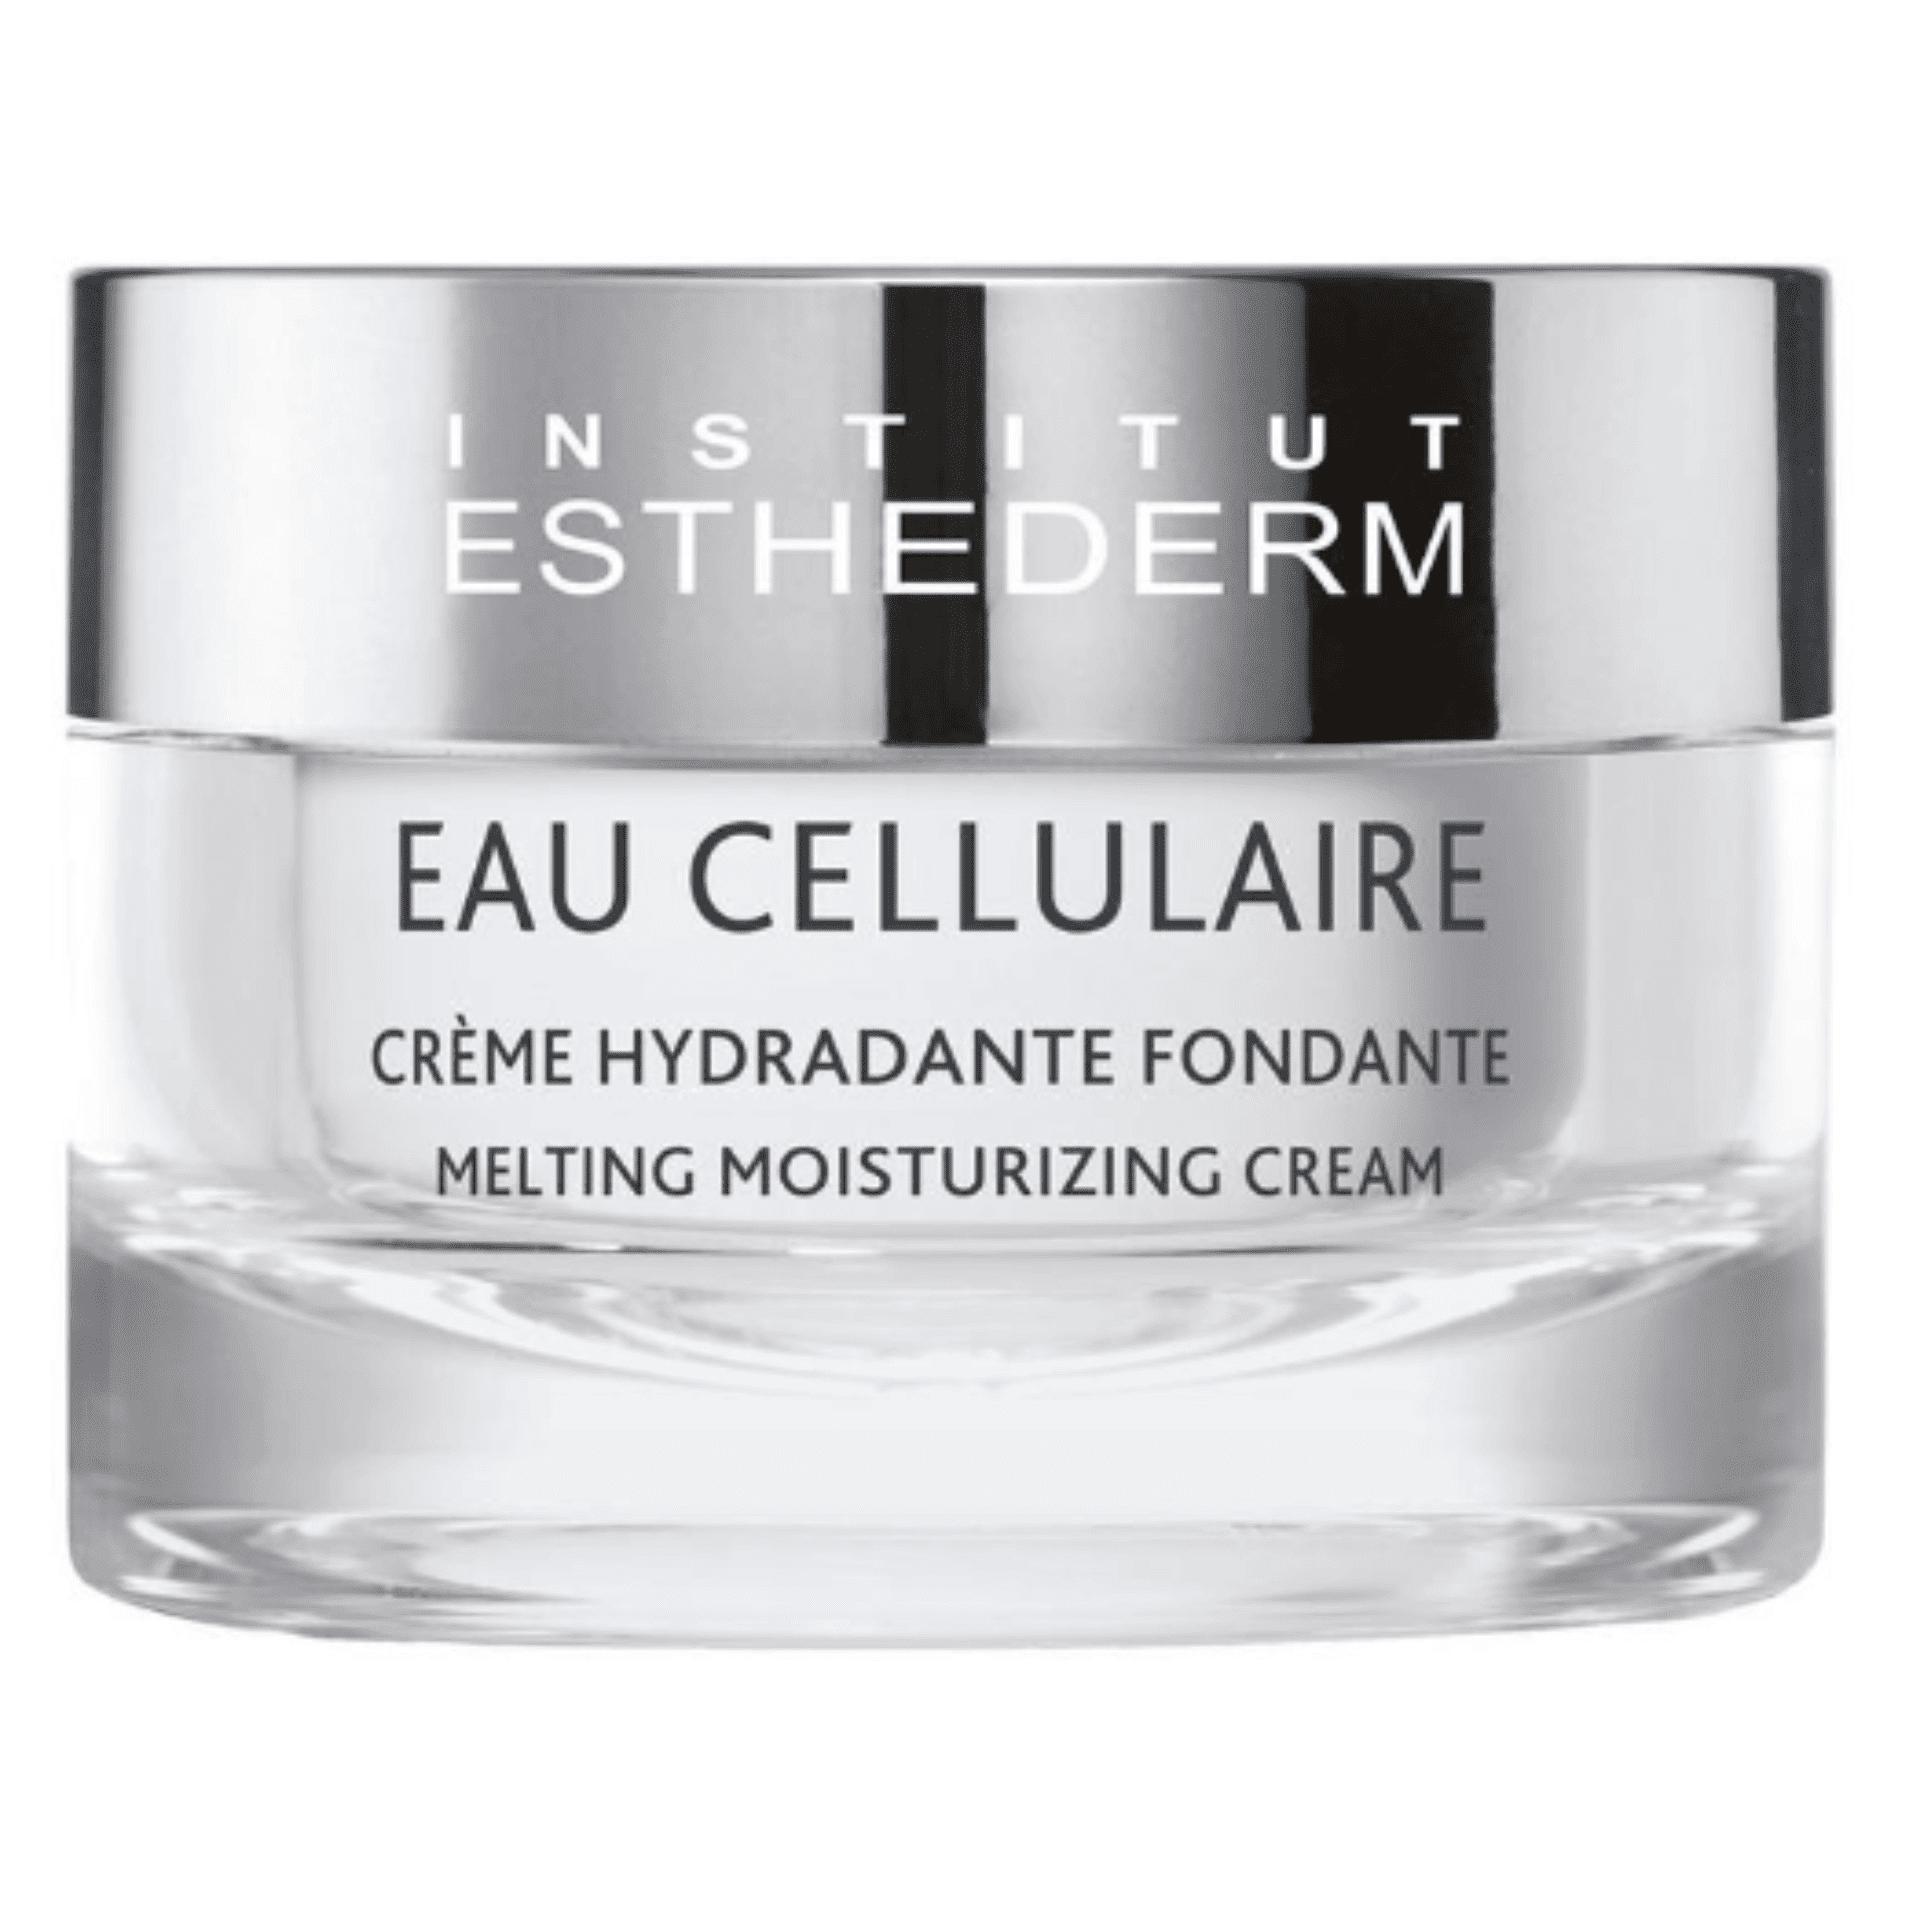 Esthederm Creme Cellulaire Water Hydra Natroom 50 ml